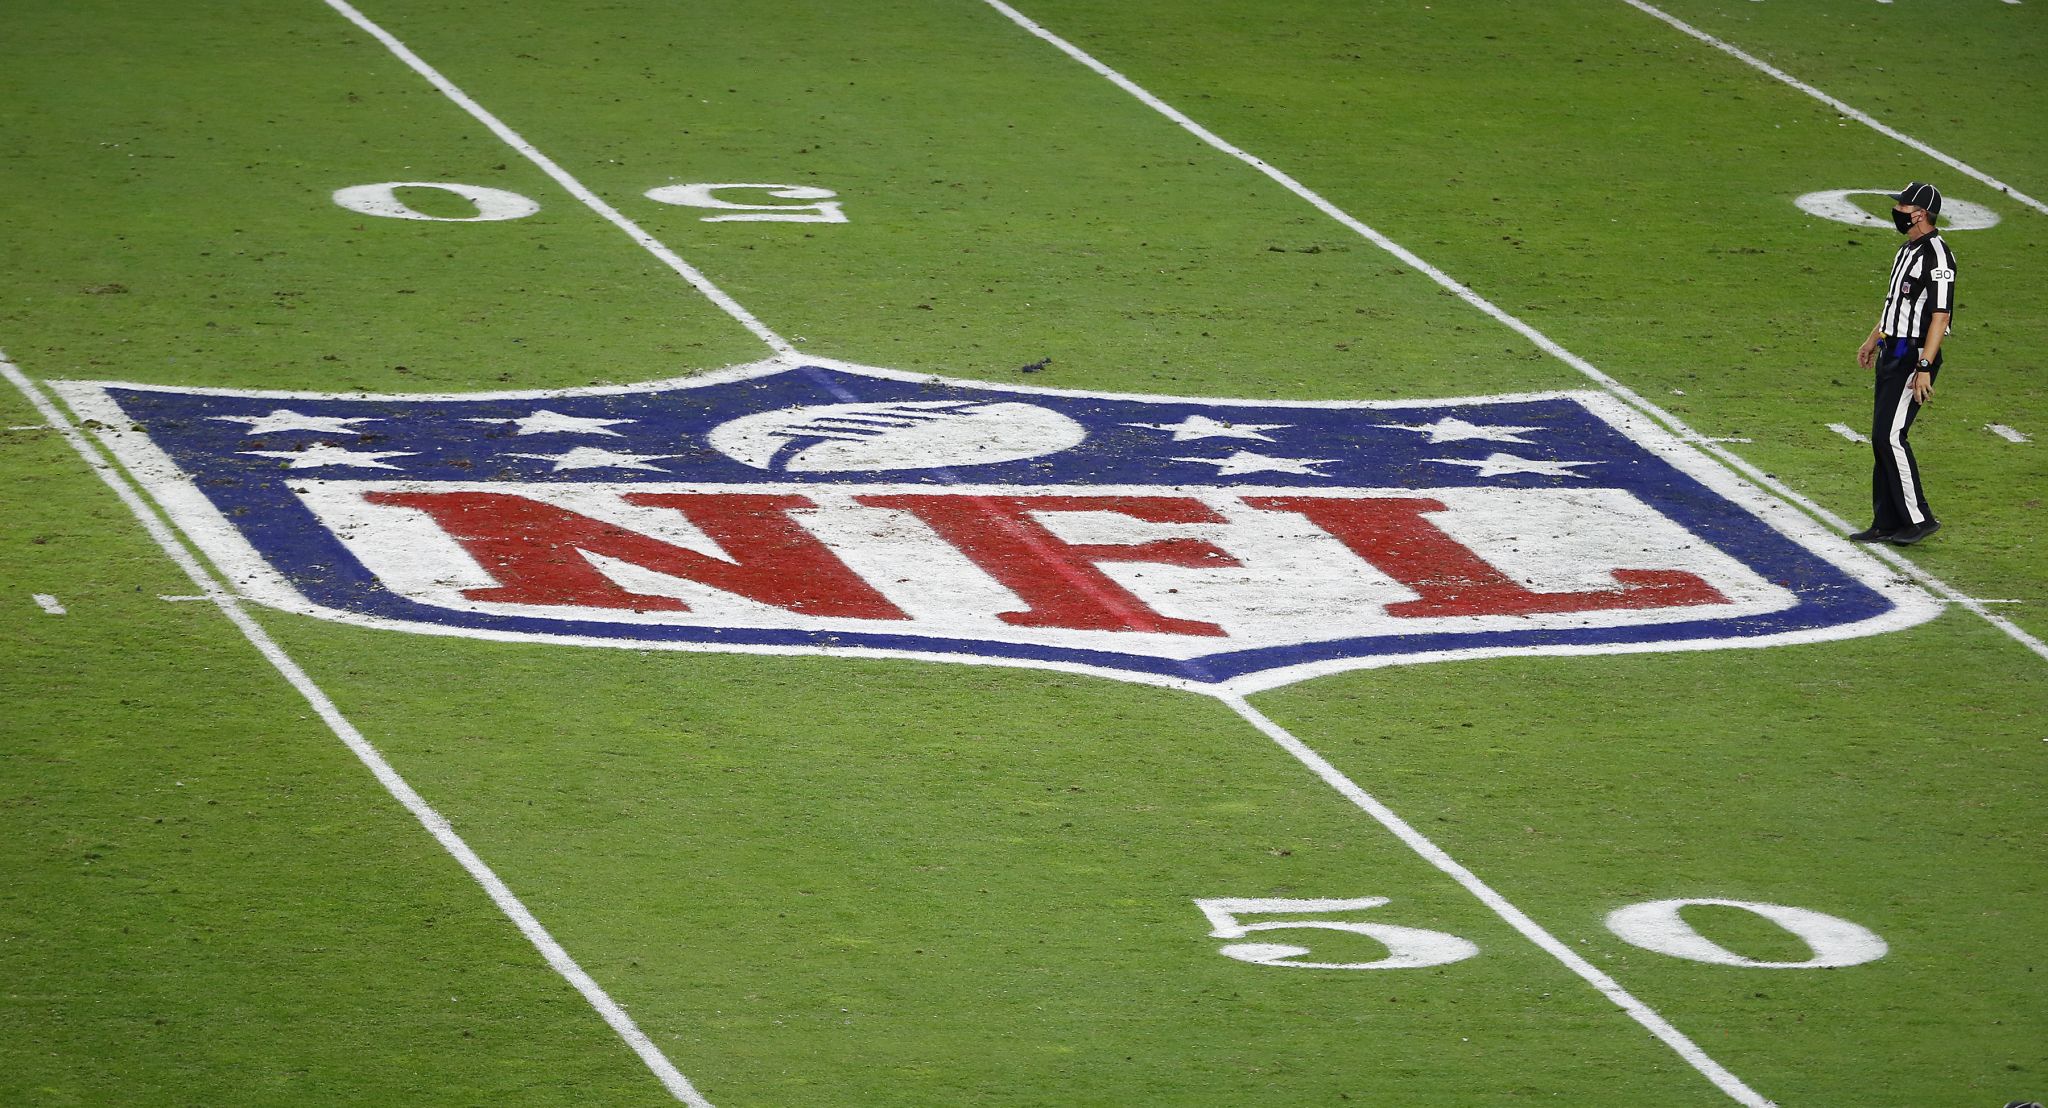 NFL owners approve AFC playoff plan after Buffalo Bills vs